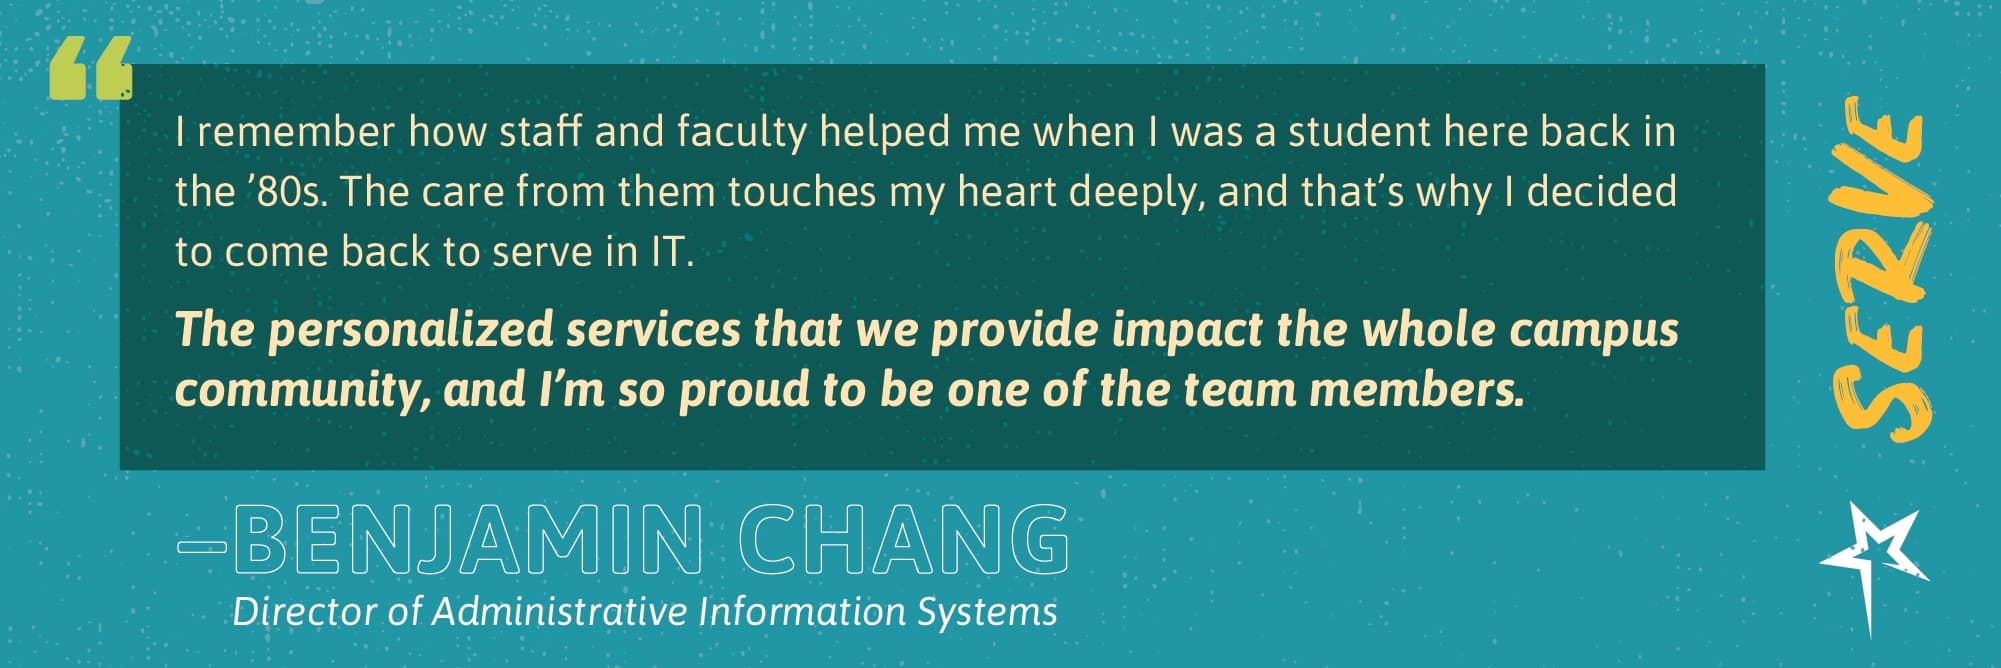 Serve: “I remember how staff and faculty helped me when I was a student here back in the ’80s. The care from them touches my heart deeply, and that’s why I decided to come back to serve in IT. The personalized services that we provide impact the whole campus community, and I’m so proud to be one of the team members.” —Benjamin Chang, Director of Administrative Information Systems